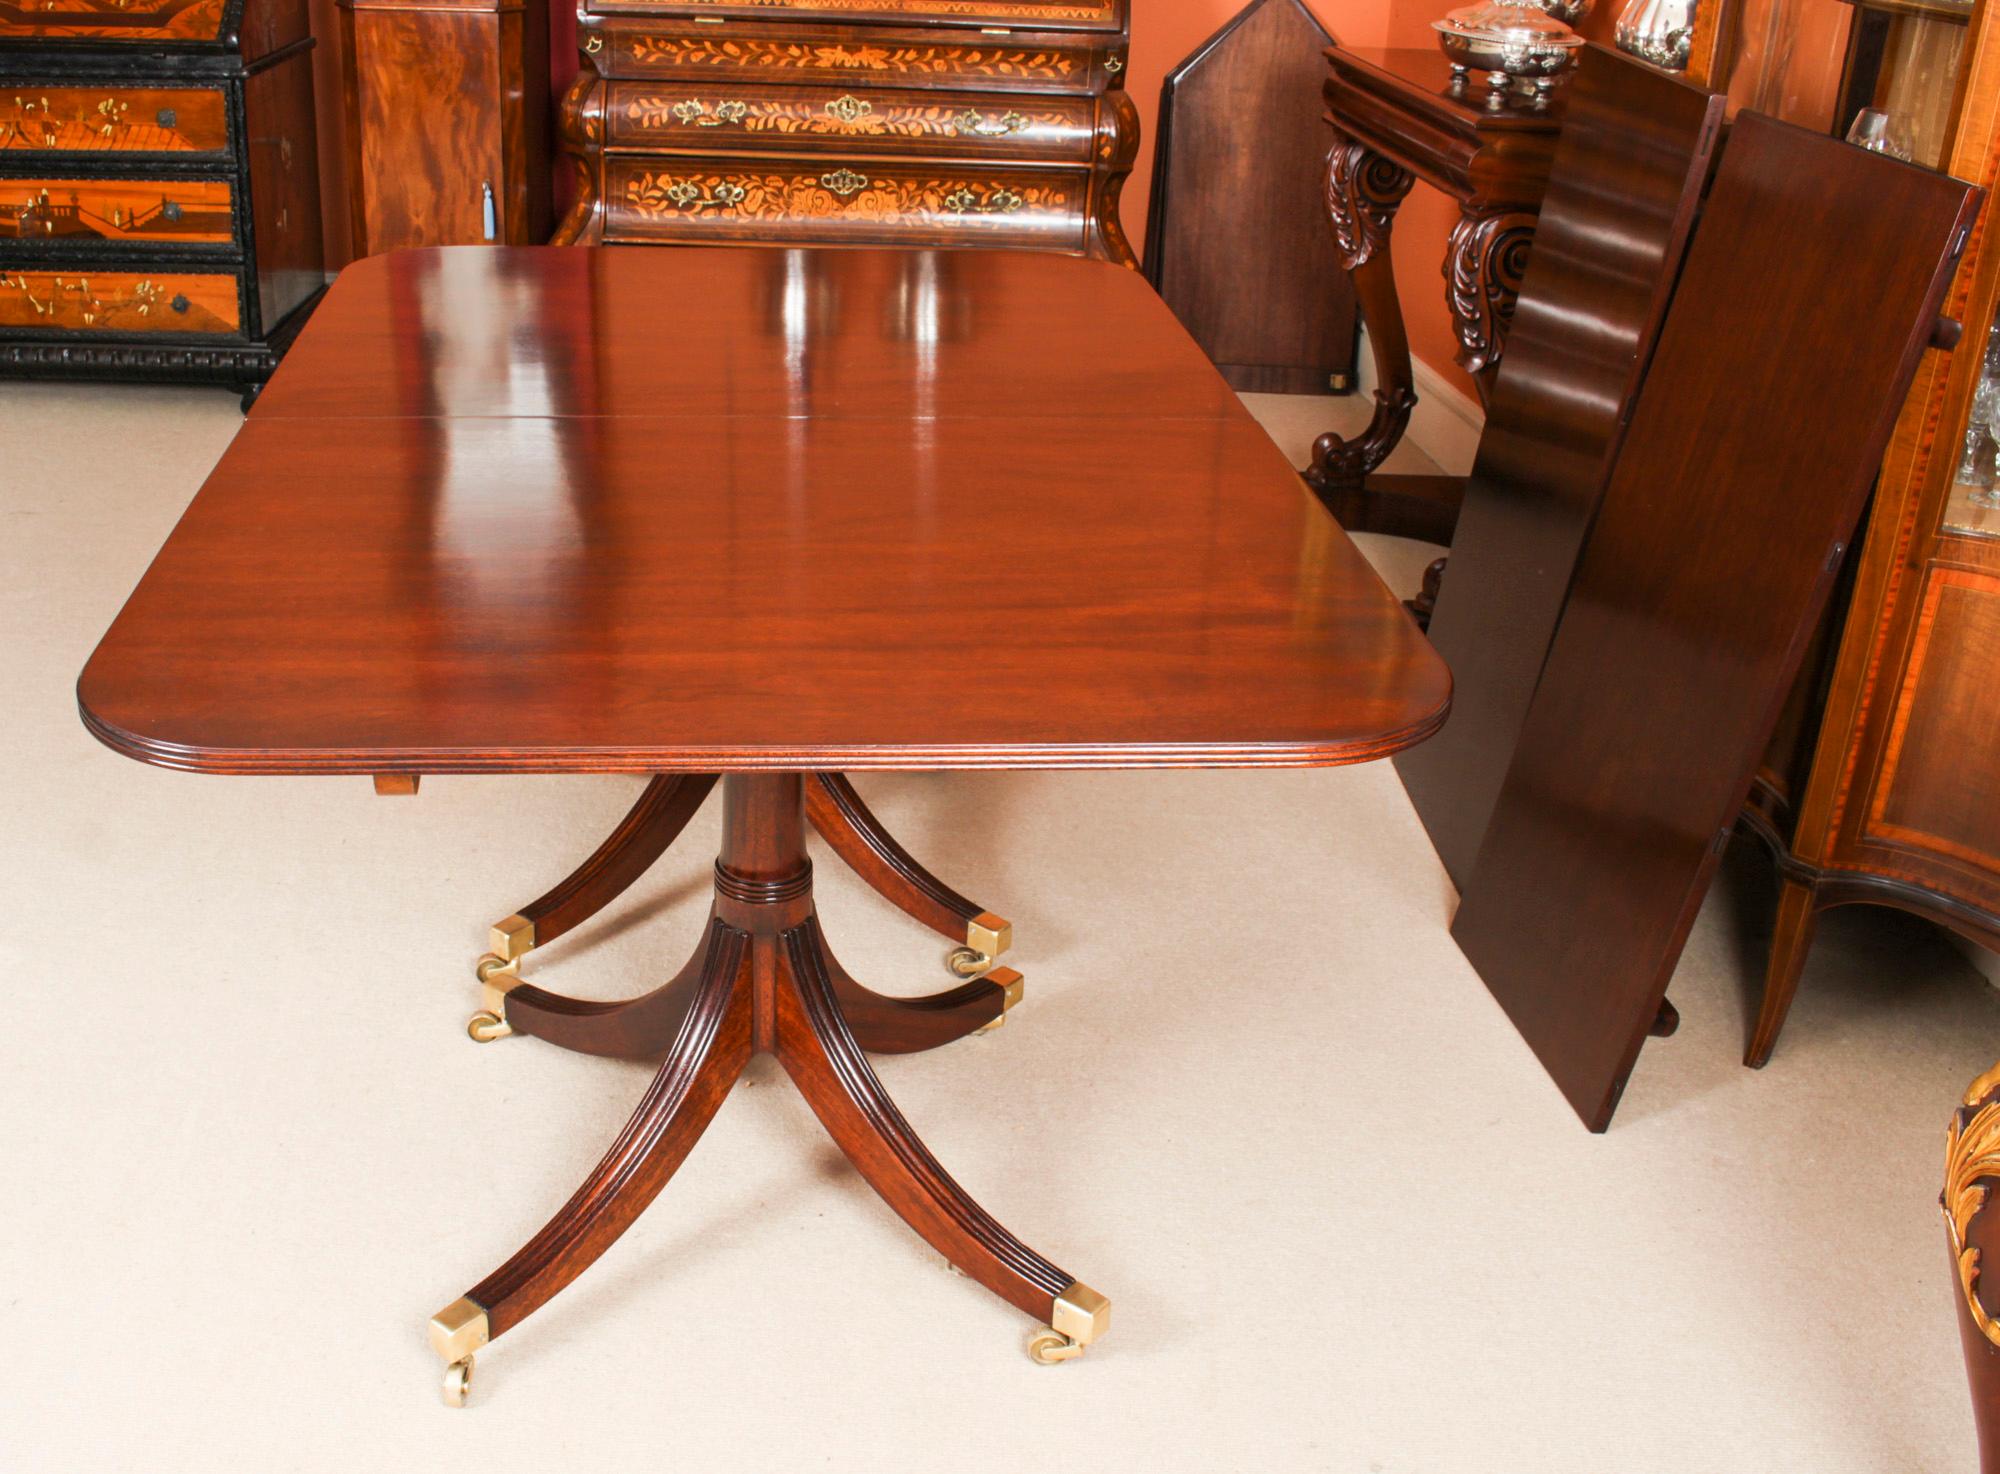 Mahogany Vintage Twin Pillar Dining Table by William Tillman 20C & 8 Chairs 19th C